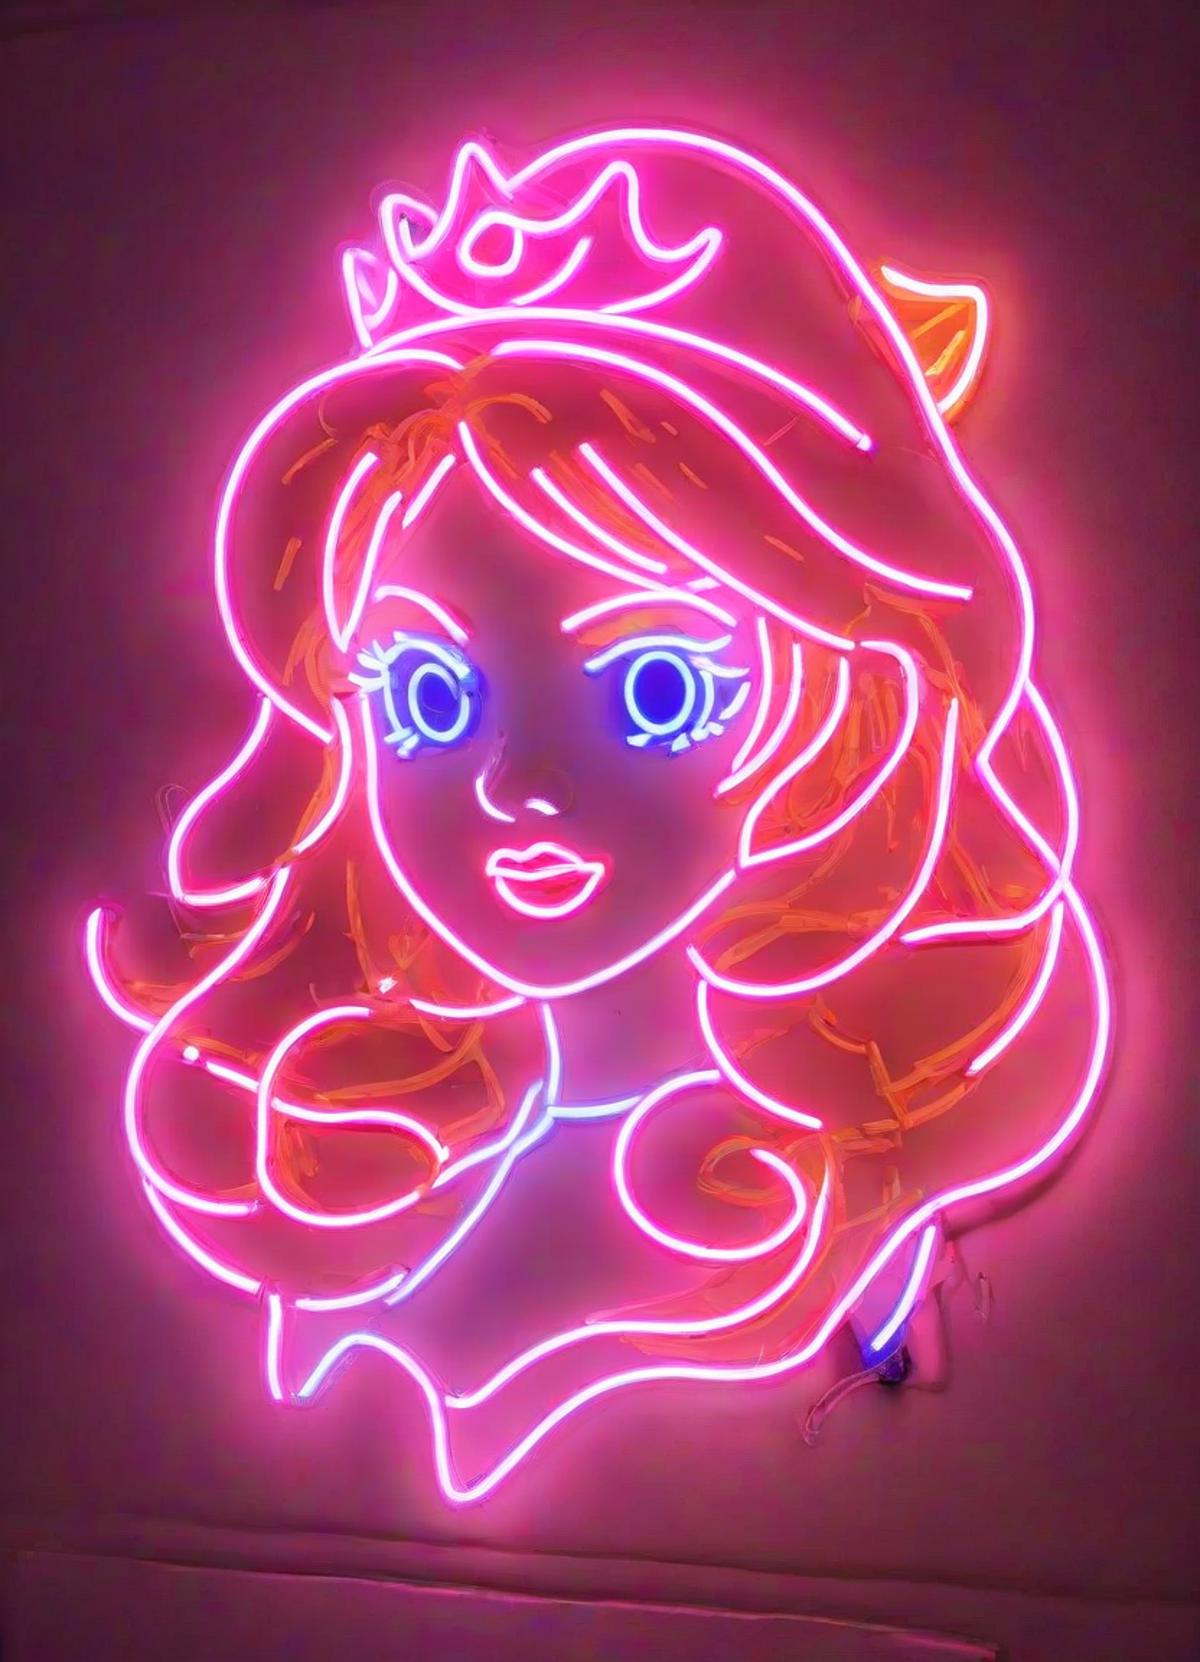 PE Neon Sign [Style] image by Proompt_Engineer